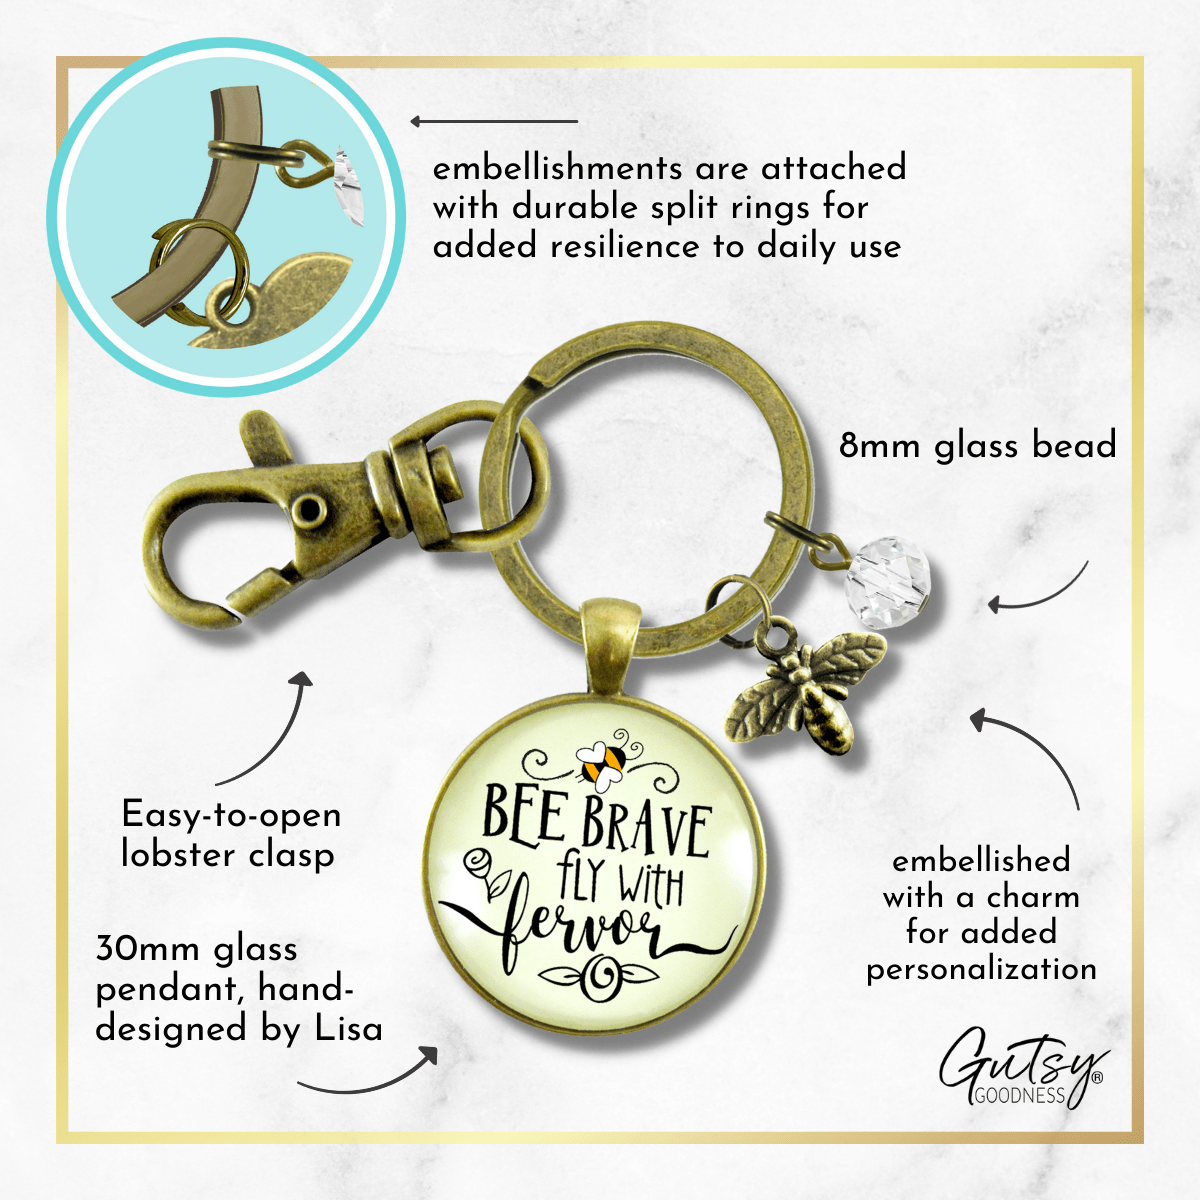 Bee Brave Keychain Fly With Fervor Fun Jewelry For Women Dainty Bumble Bee Quote - Gutsy Goodness